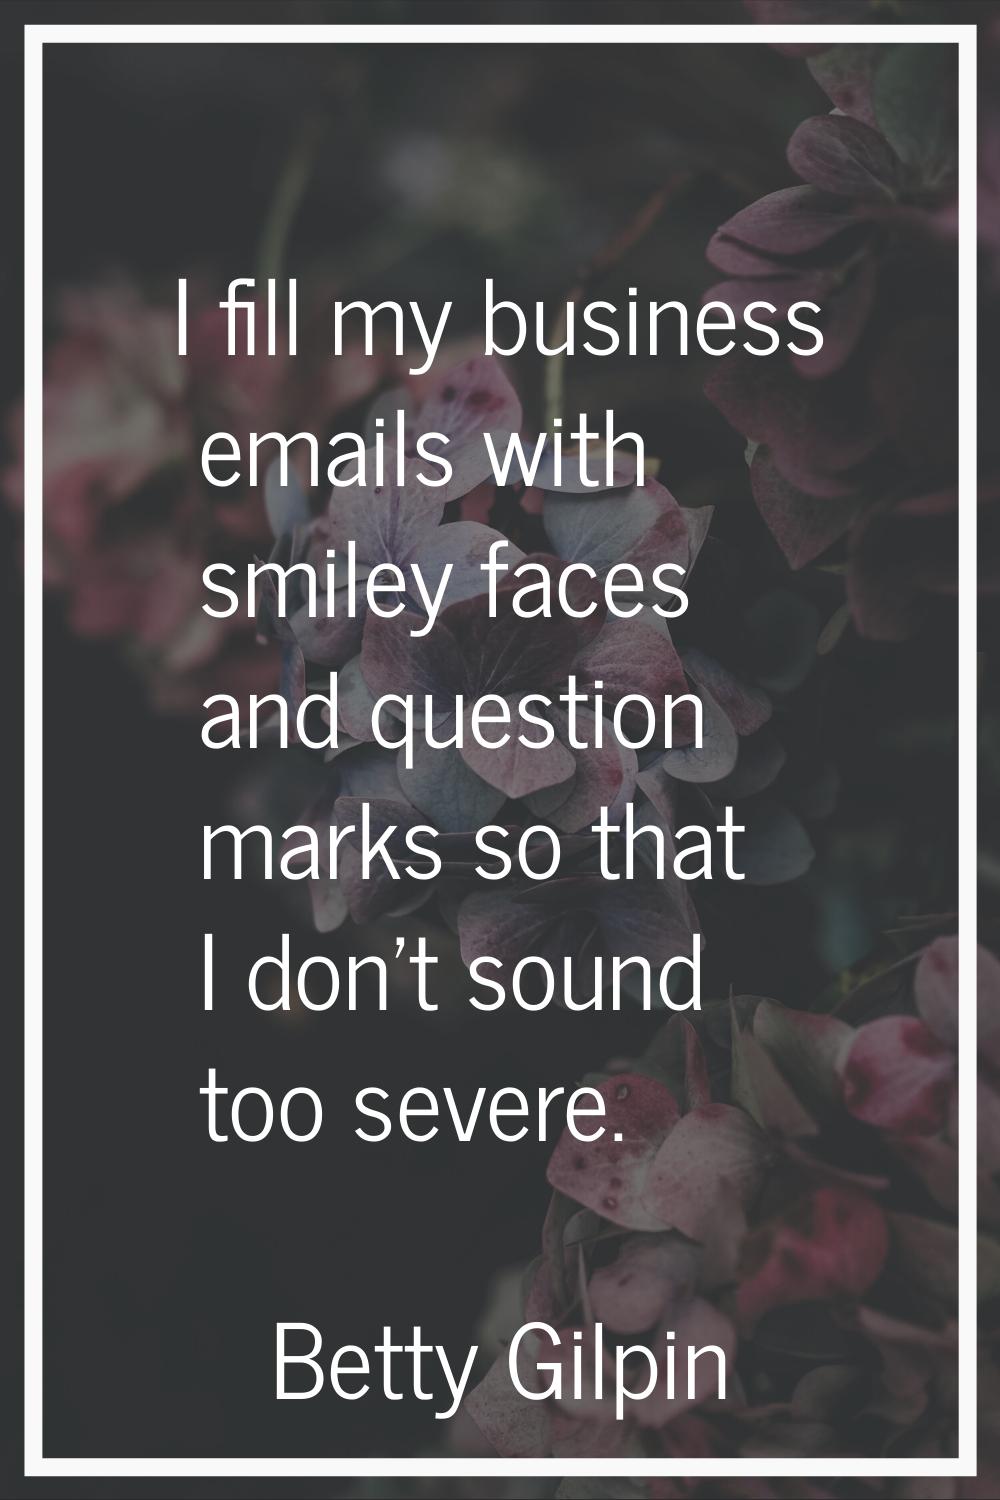 I fill my business emails with smiley faces and question marks so that I don't sound too severe.